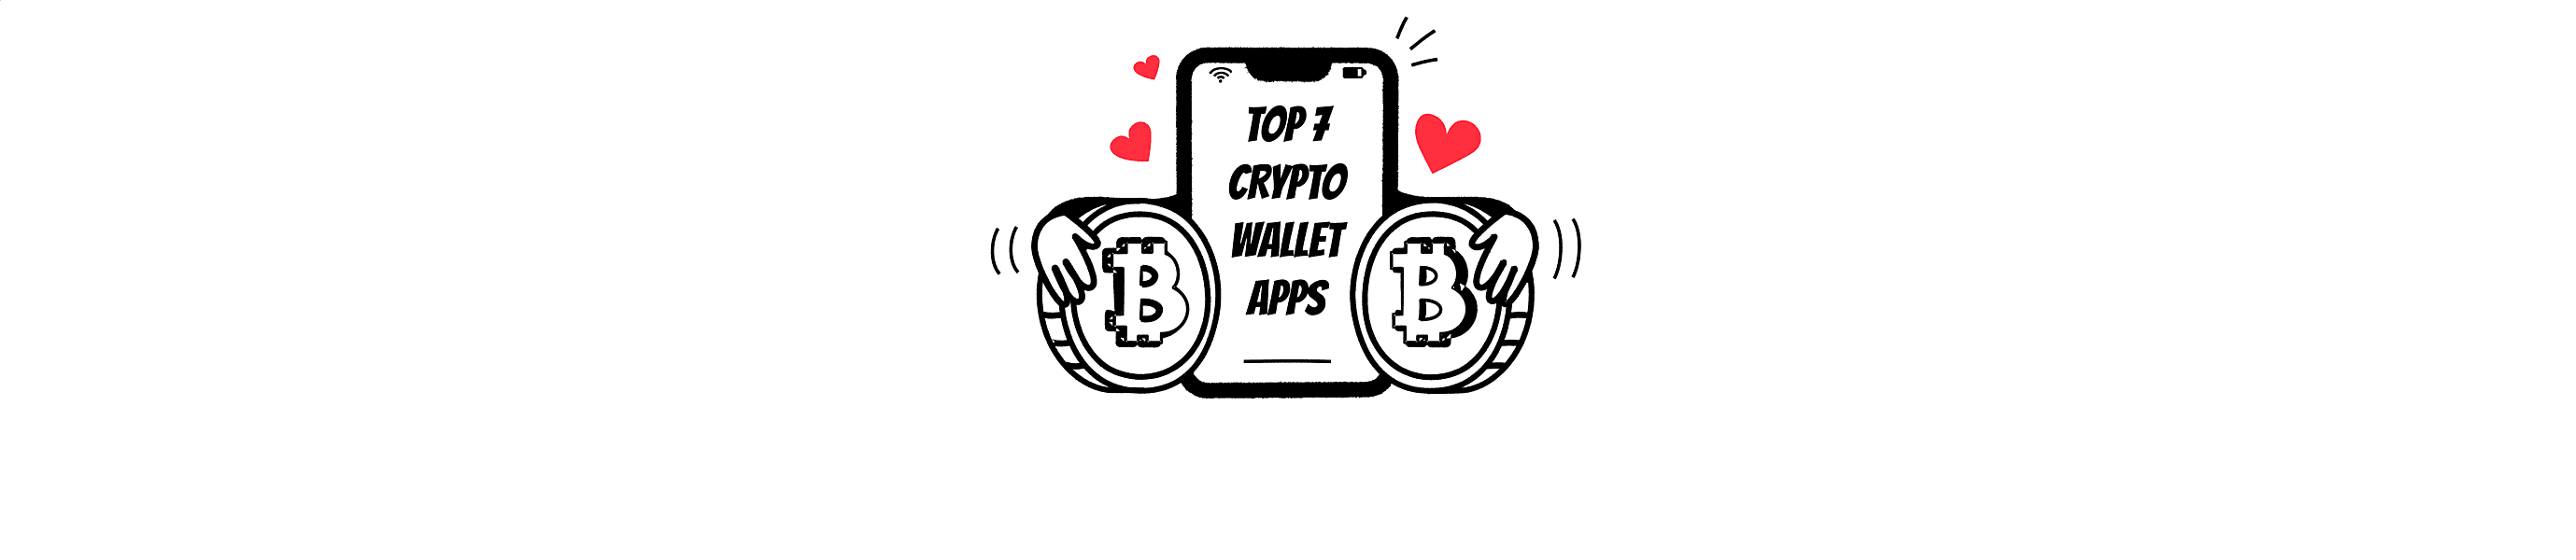 Top 7 Crypto Wallet Apps